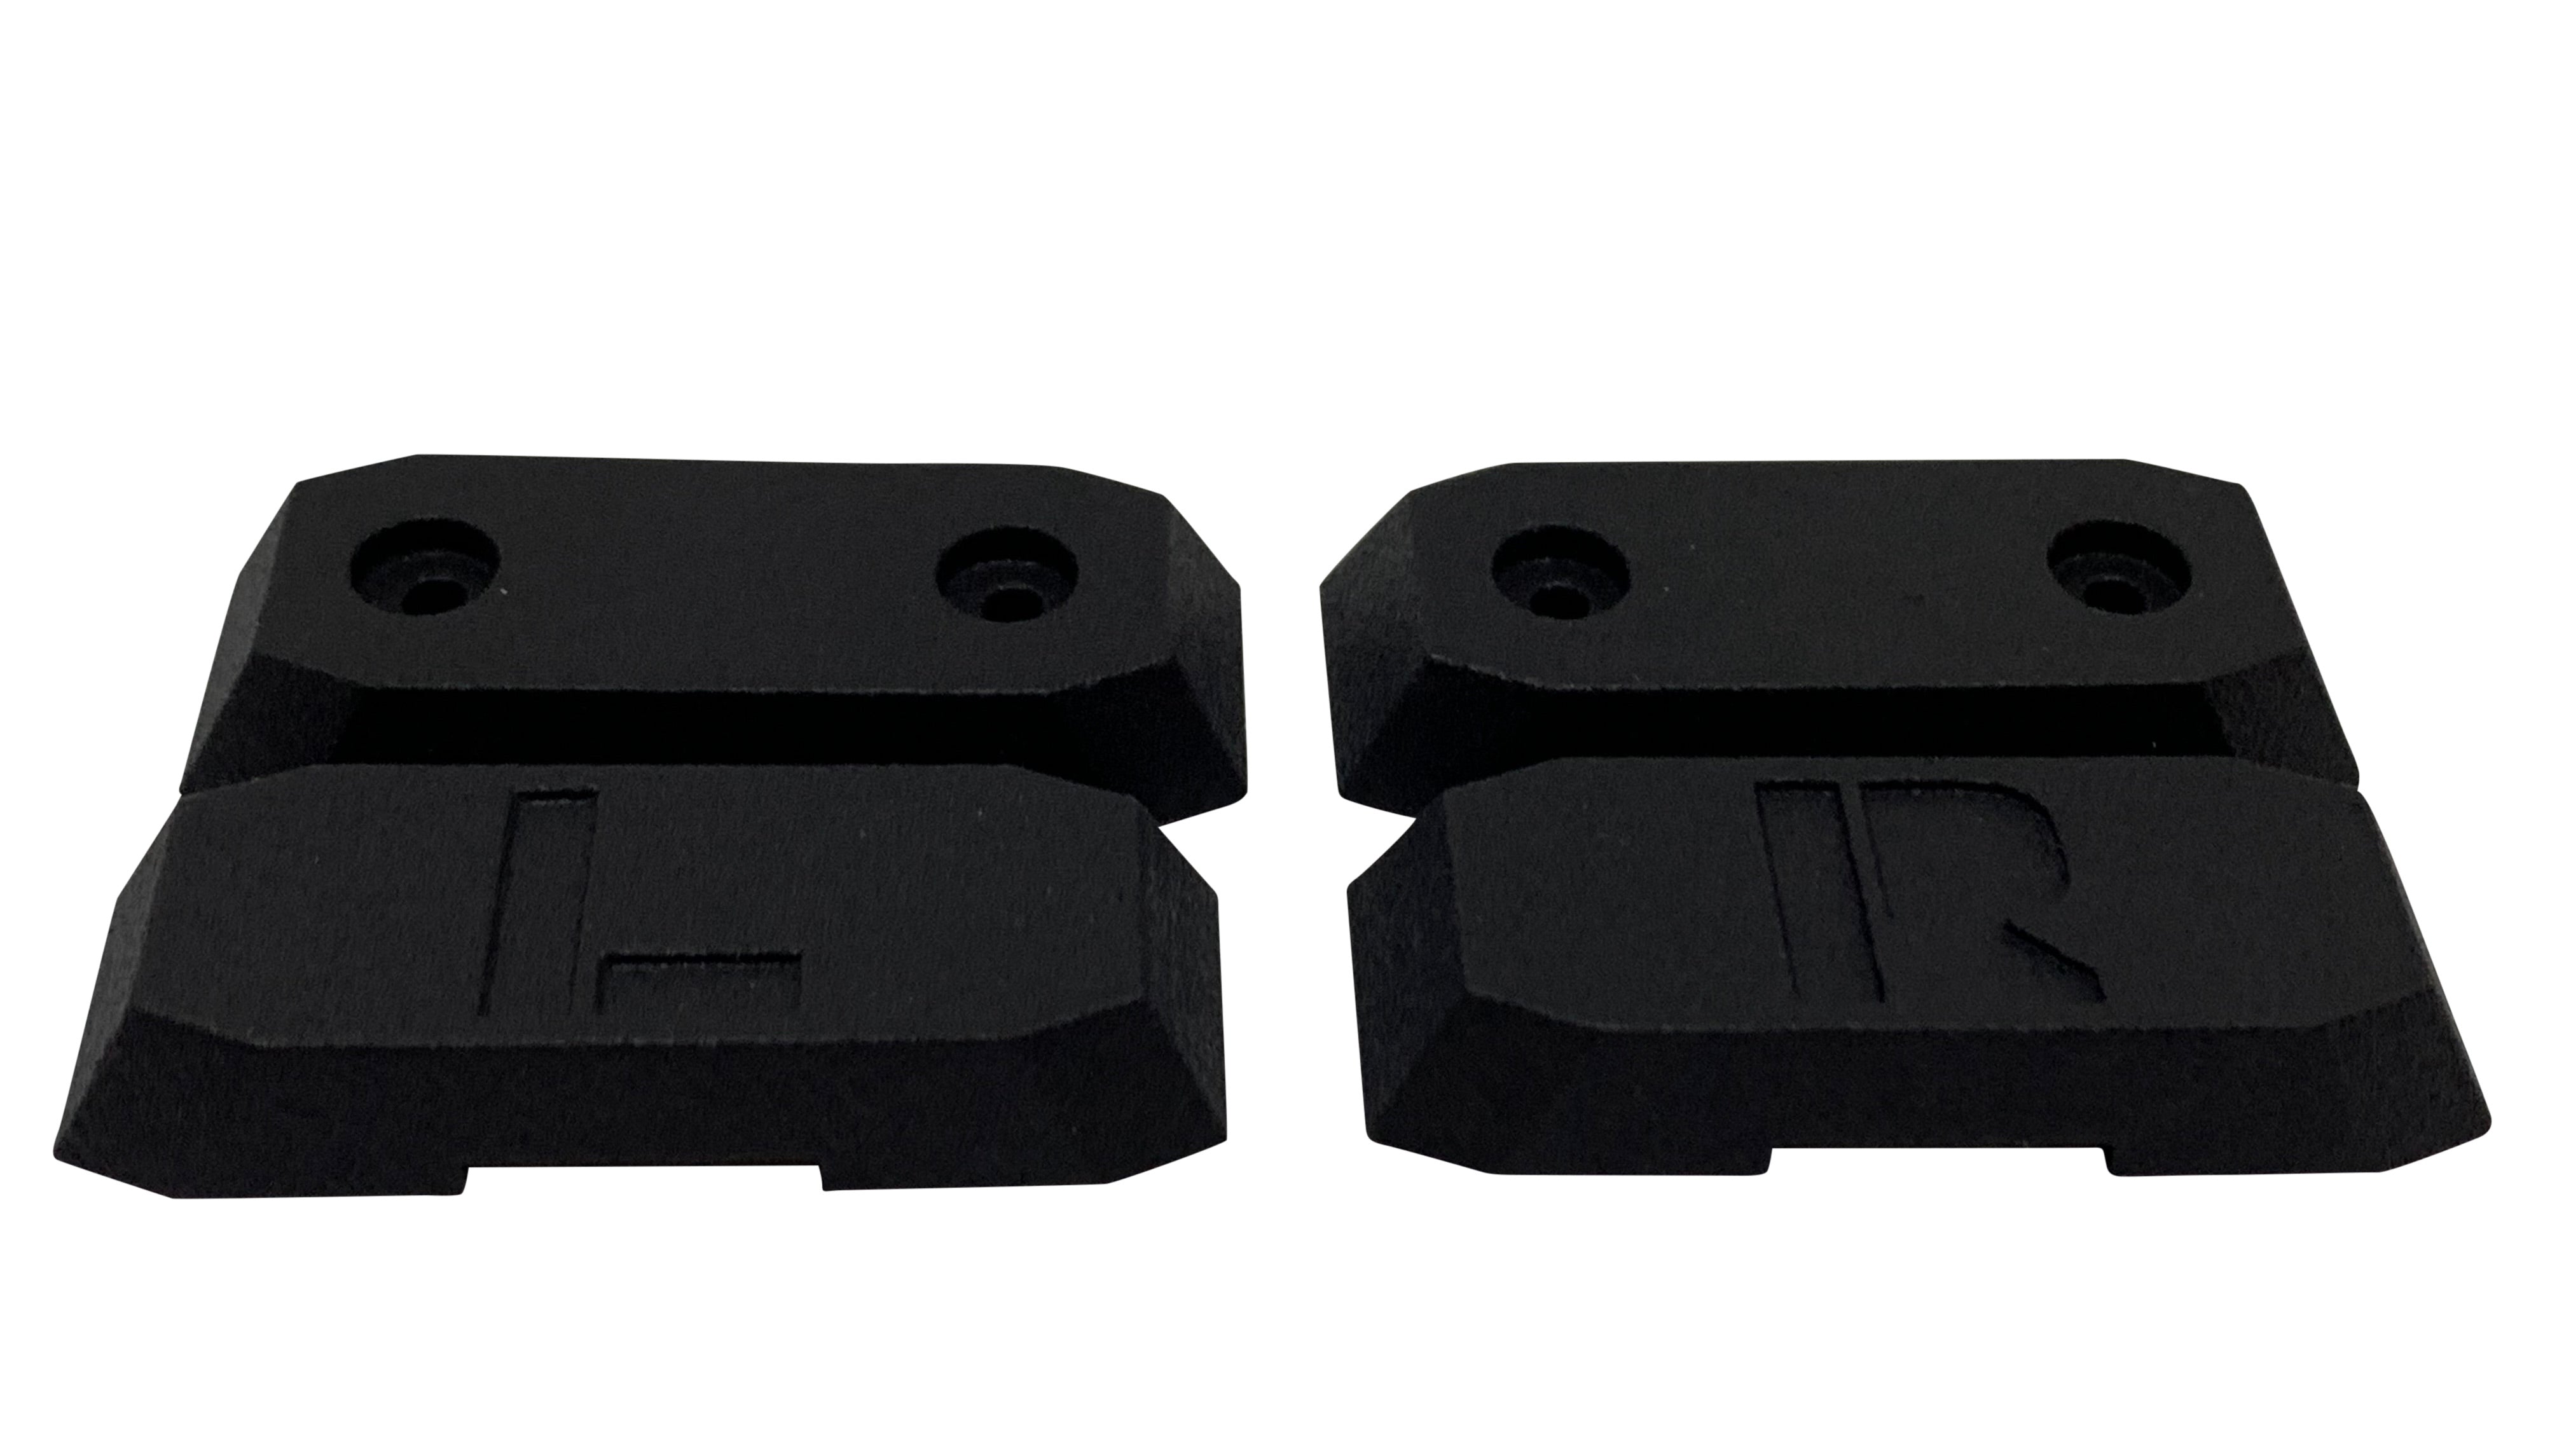 CentralSound Upgraded Replacement Slider Cover Side Headband Parts for Beyerdynamic Headphones - CentralSound